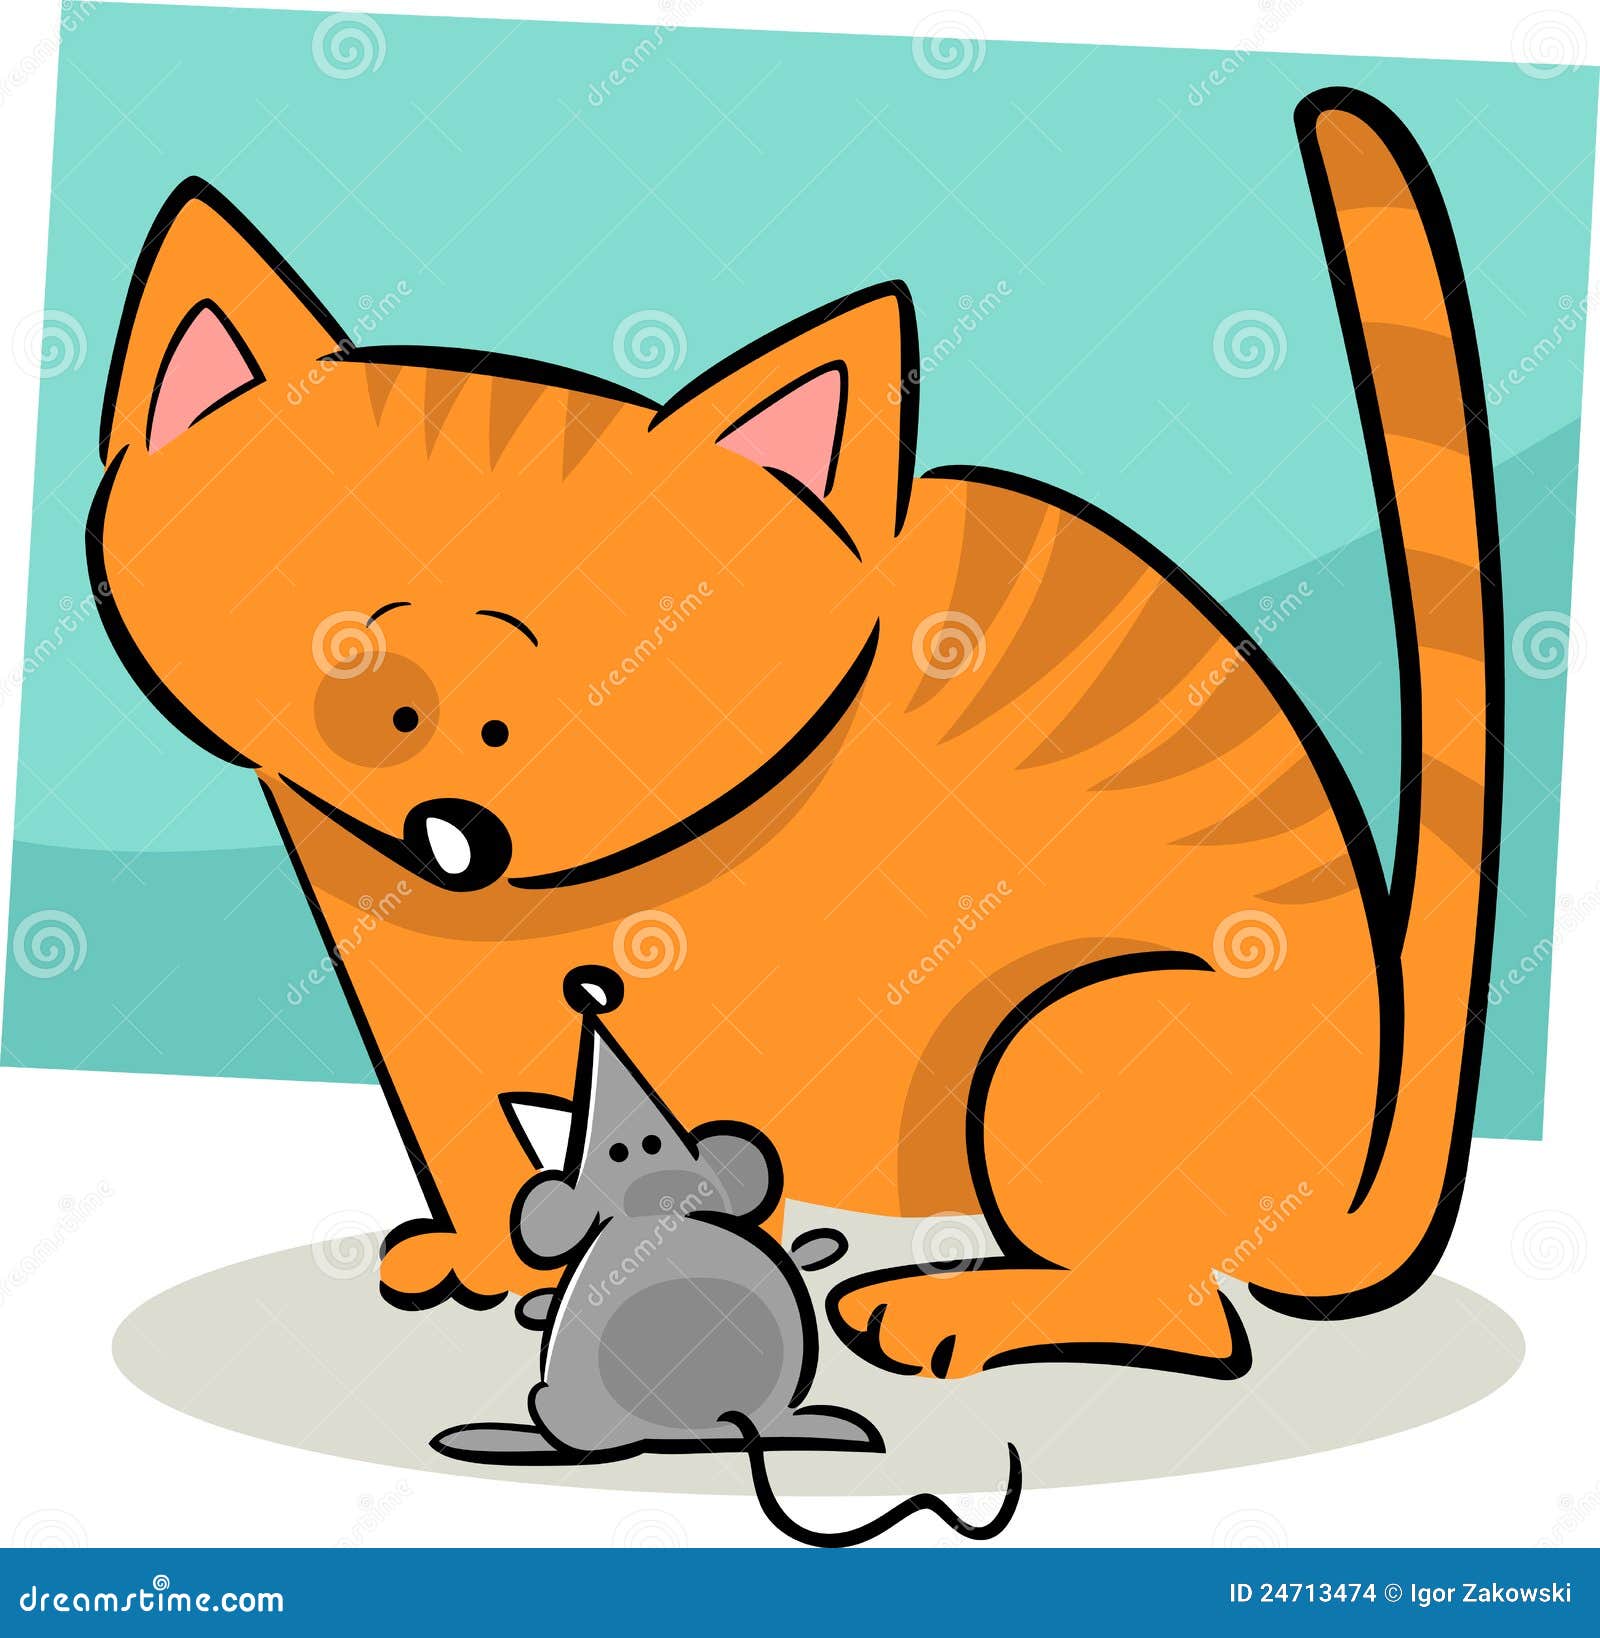  Cartoon  Doodle Of Cat  And Mouse Stock Vector 